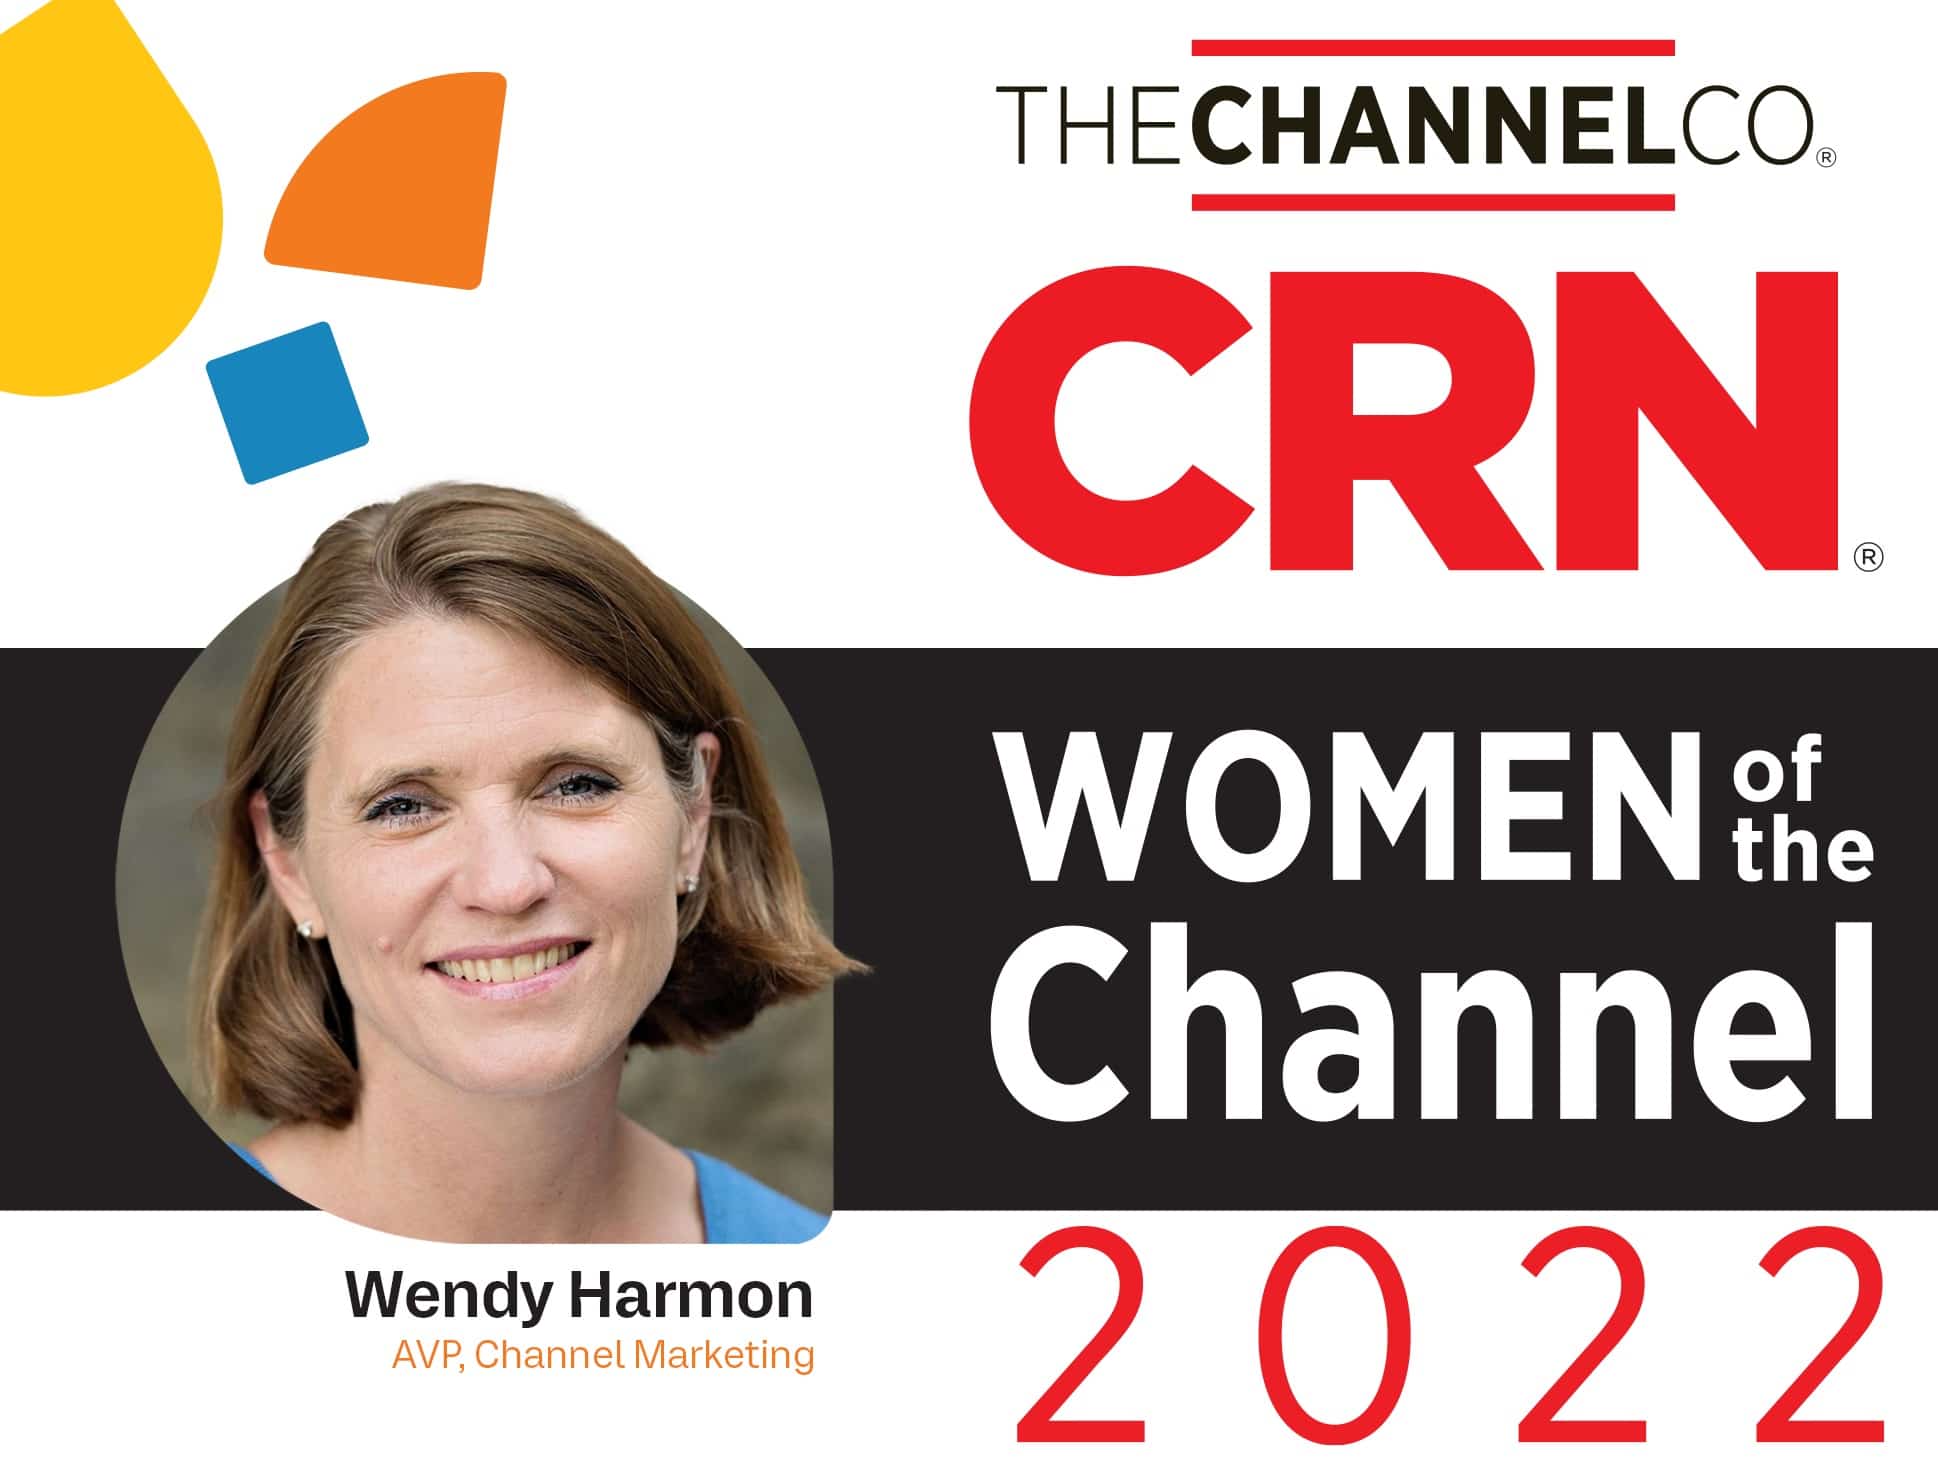 Photo of Wendy Harmon AVP Channel Marketing next to text reading CRN Women of the Channel 2022